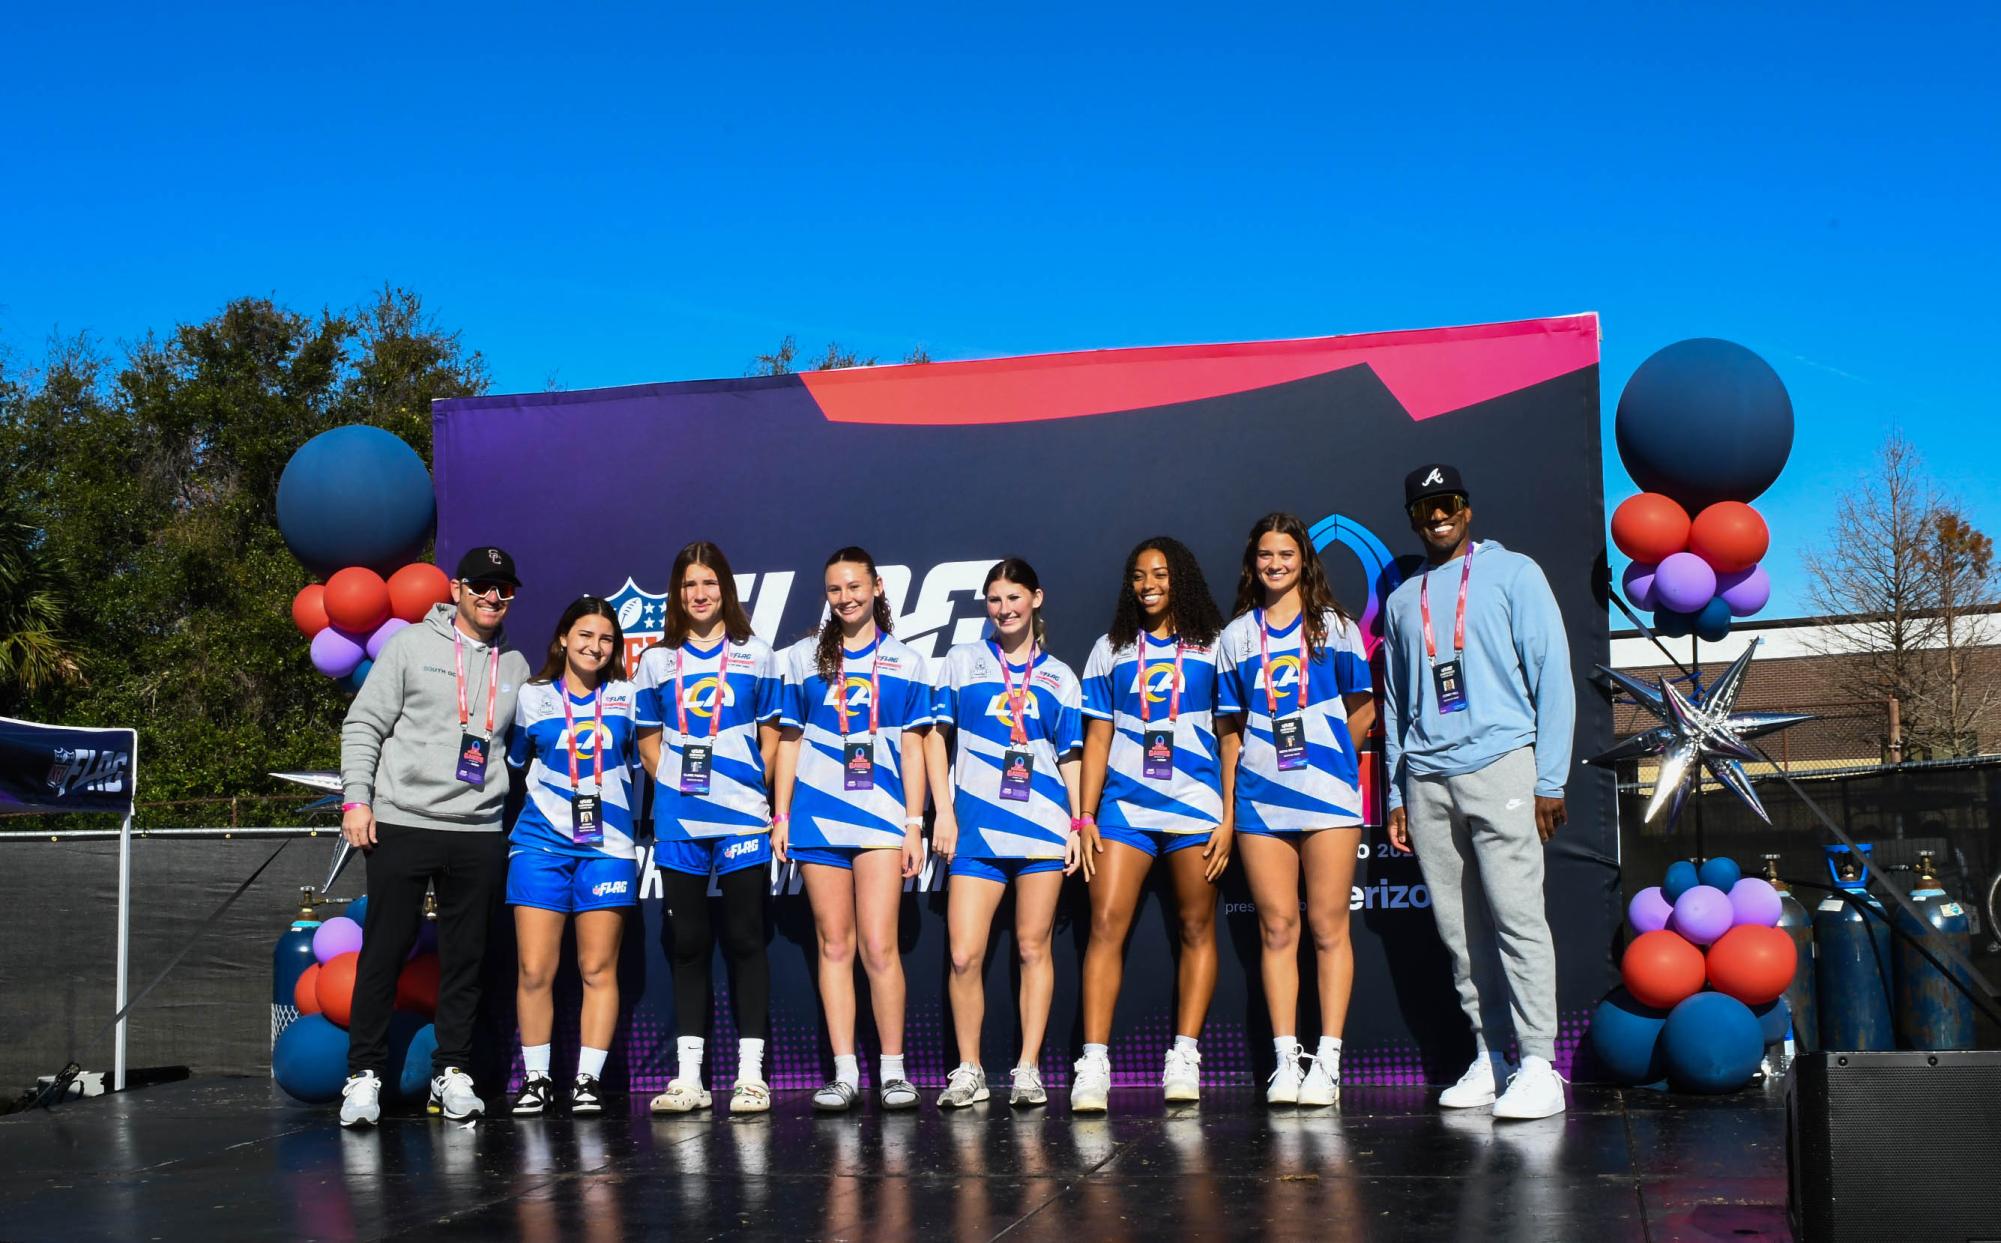 South OC Wave 17u girls team smiles as they were honored on stage in Orlando, Florida. The team has four players from San Juan Hills, one player from Trabuco Hills, and one player from Mission Viejo High School all coming together to represent the Los Angeles Rams. 

